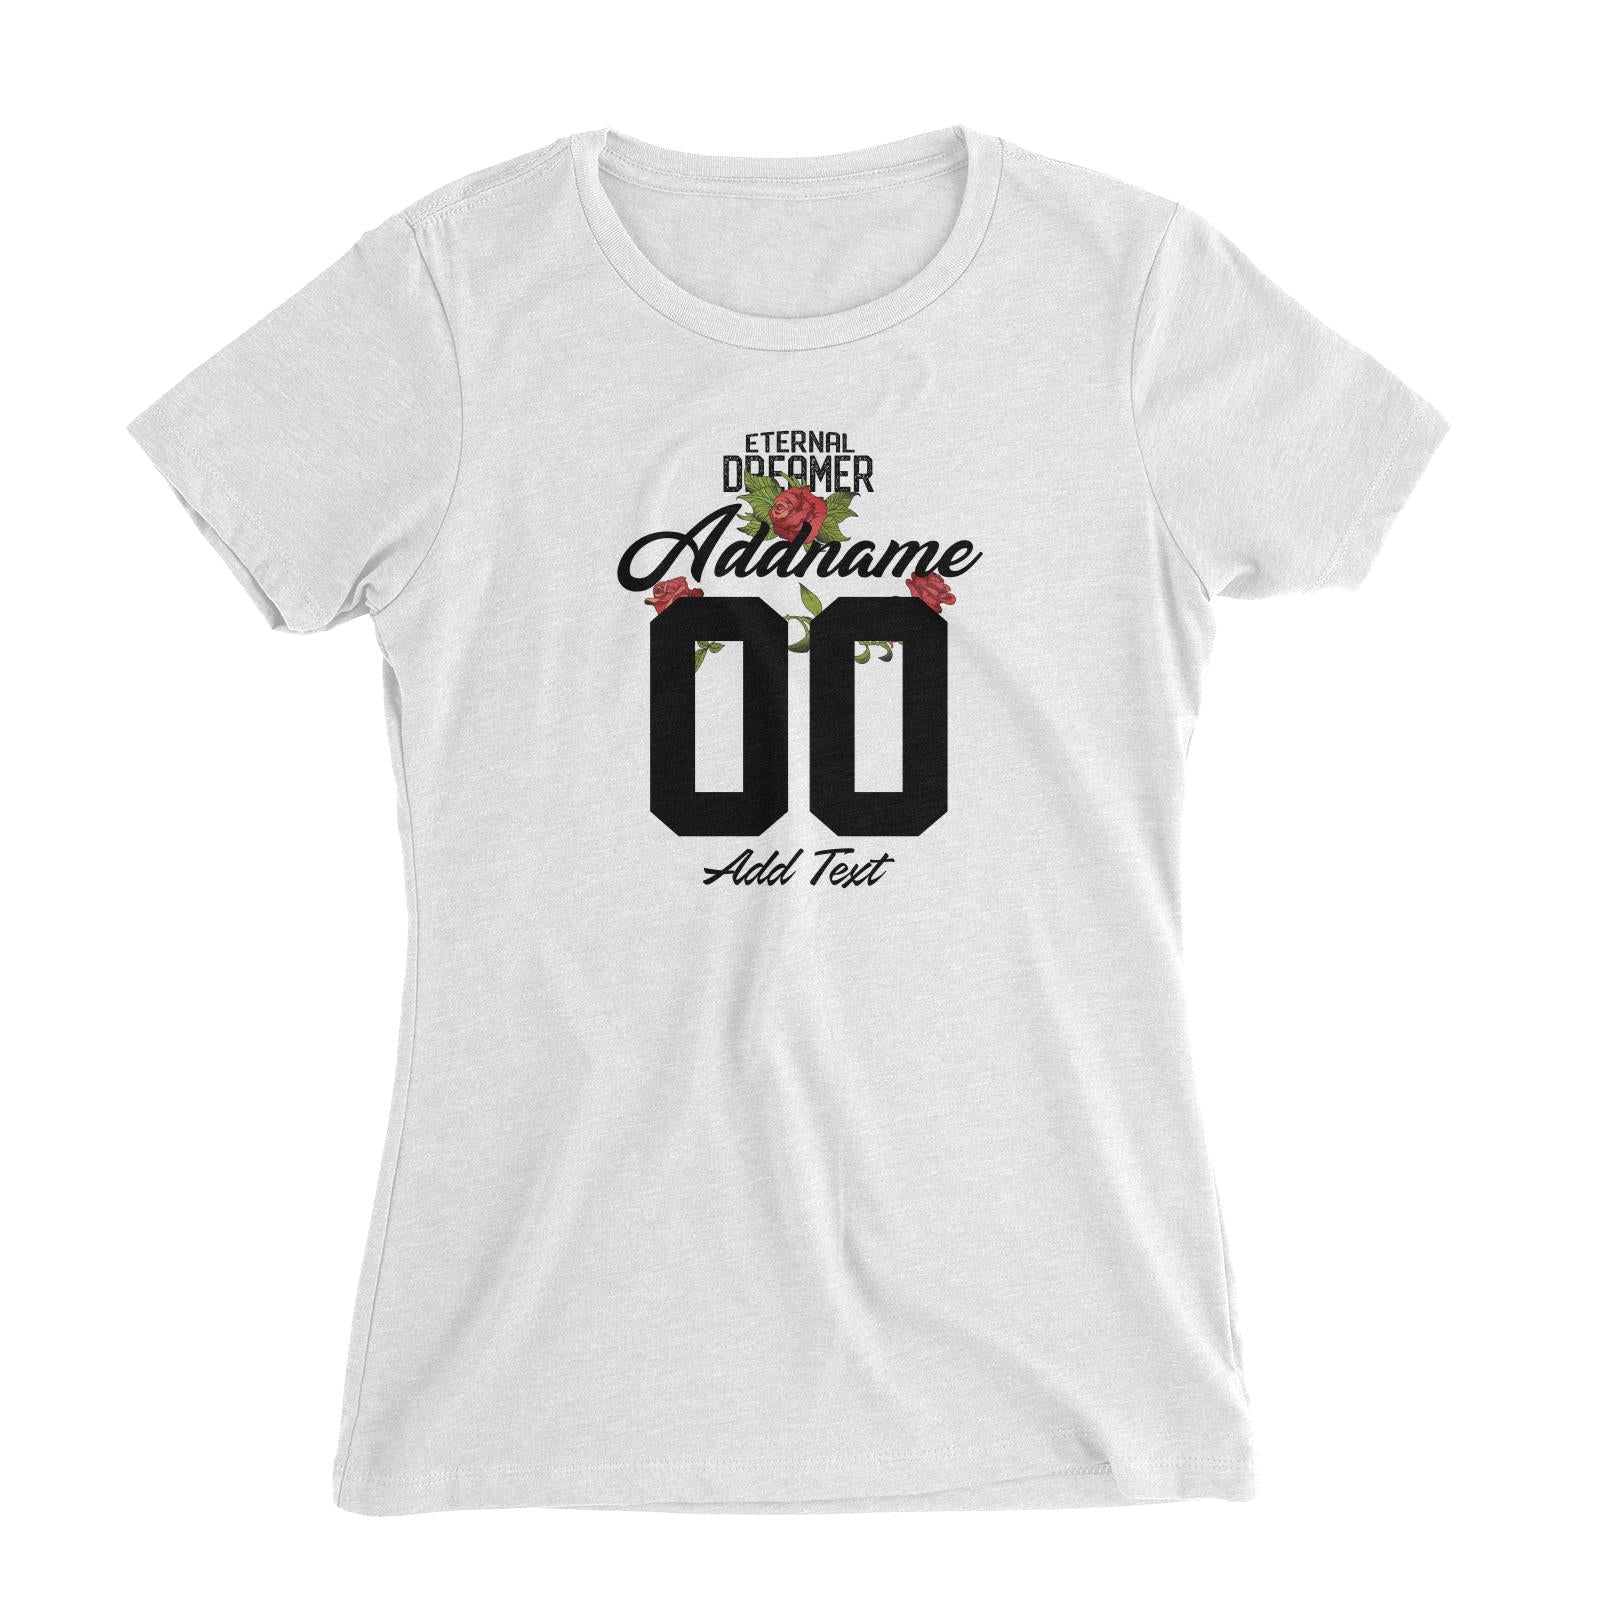 Eternal Dreamer with Roses Personalizable with Name Number and Text Women's Slim Fit T-Shirt